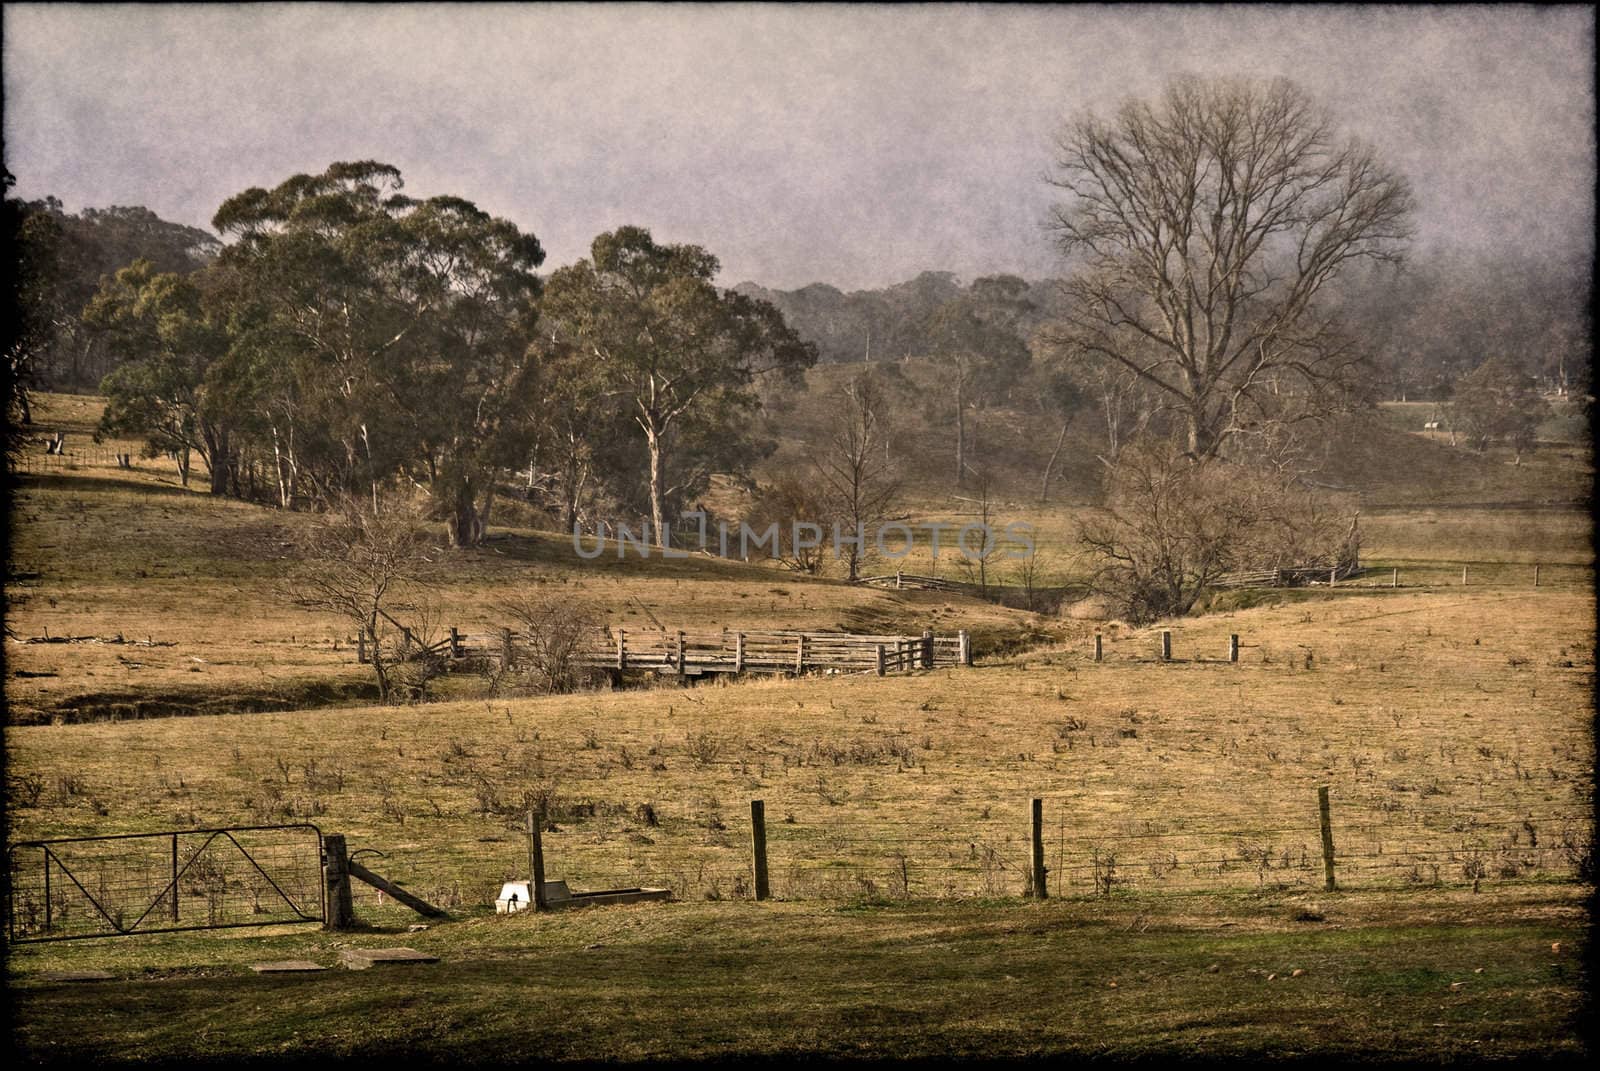 old farm by clearviewstock